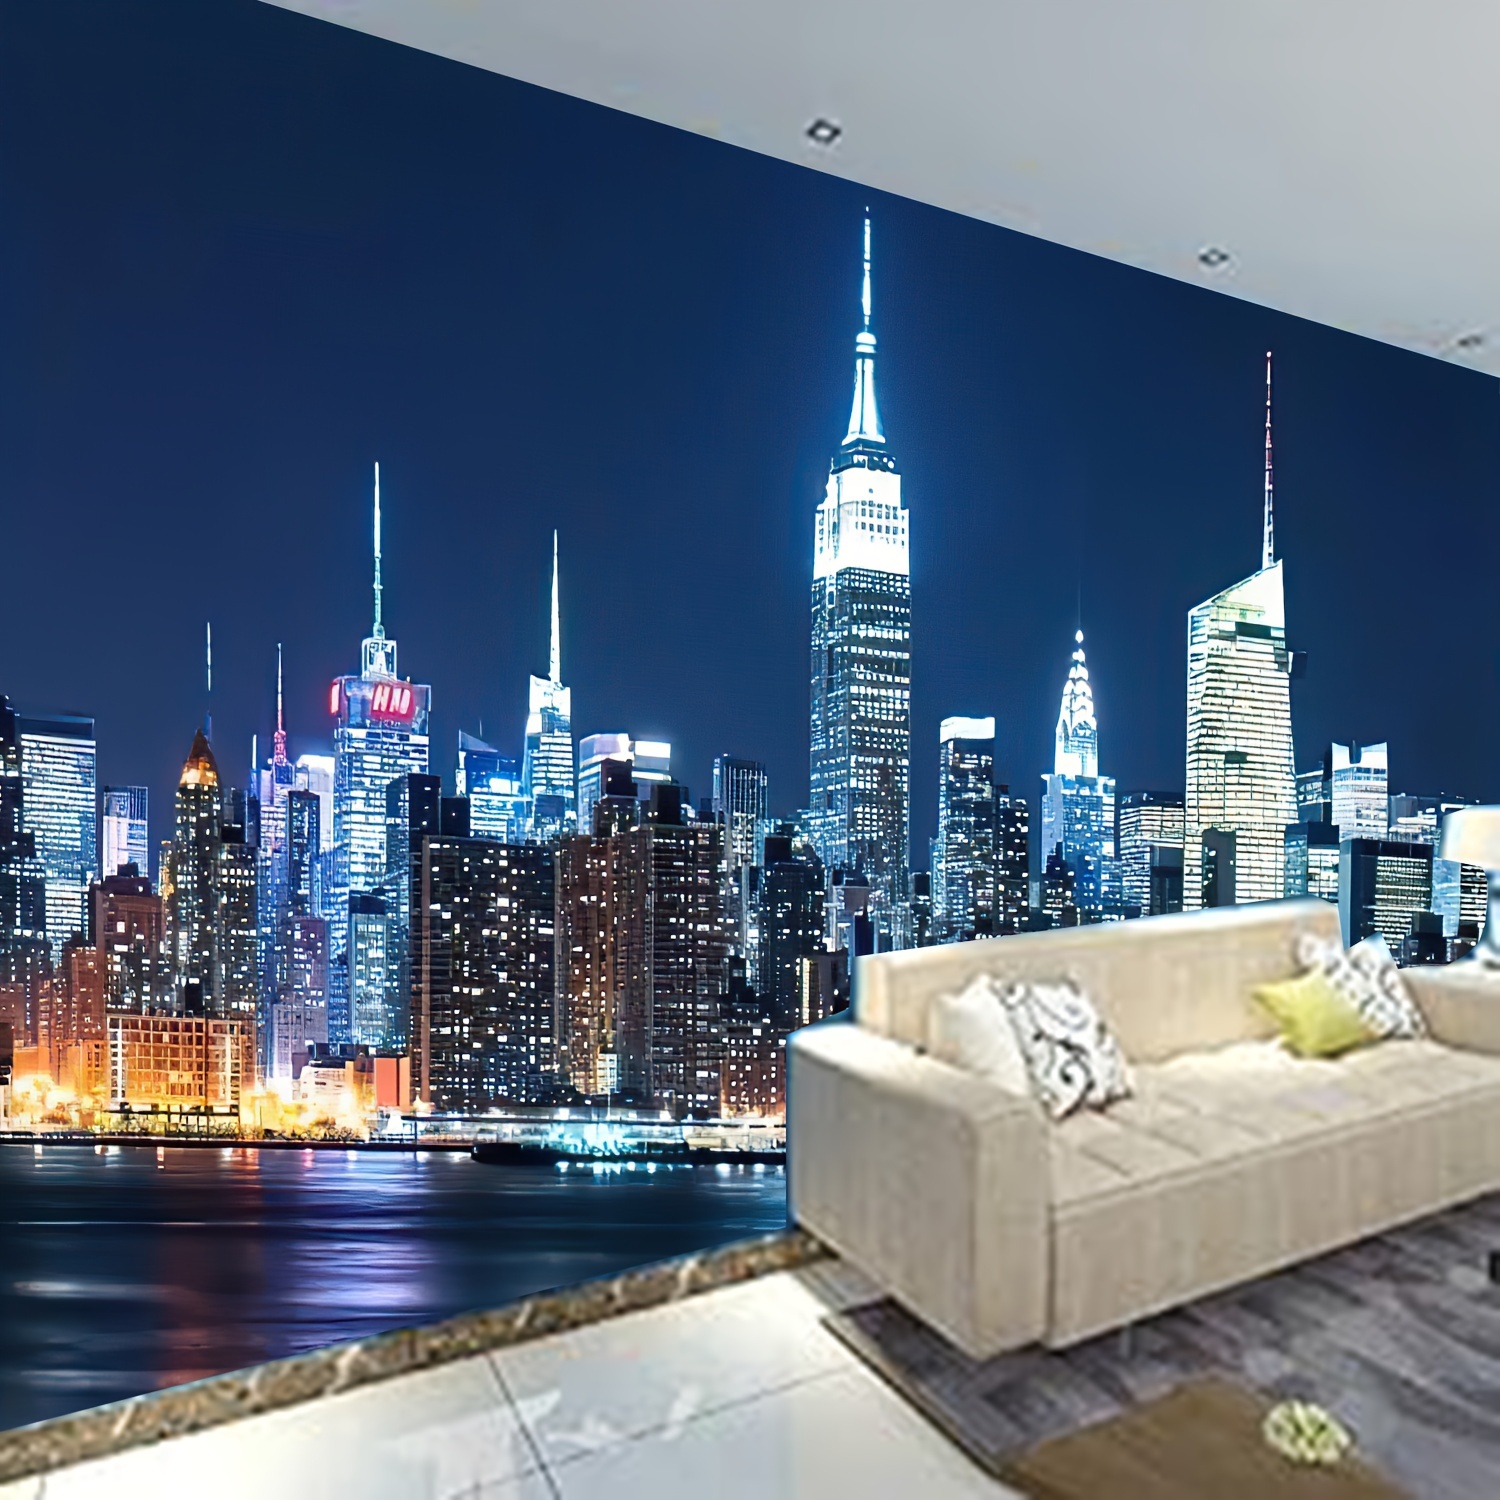 

New York Night Skyline Tapestry - Vibrant Cityscape Wall Hanging For Living Room, Bedroom, Office - Includes Easy Install Kit, Lightweight Polyester